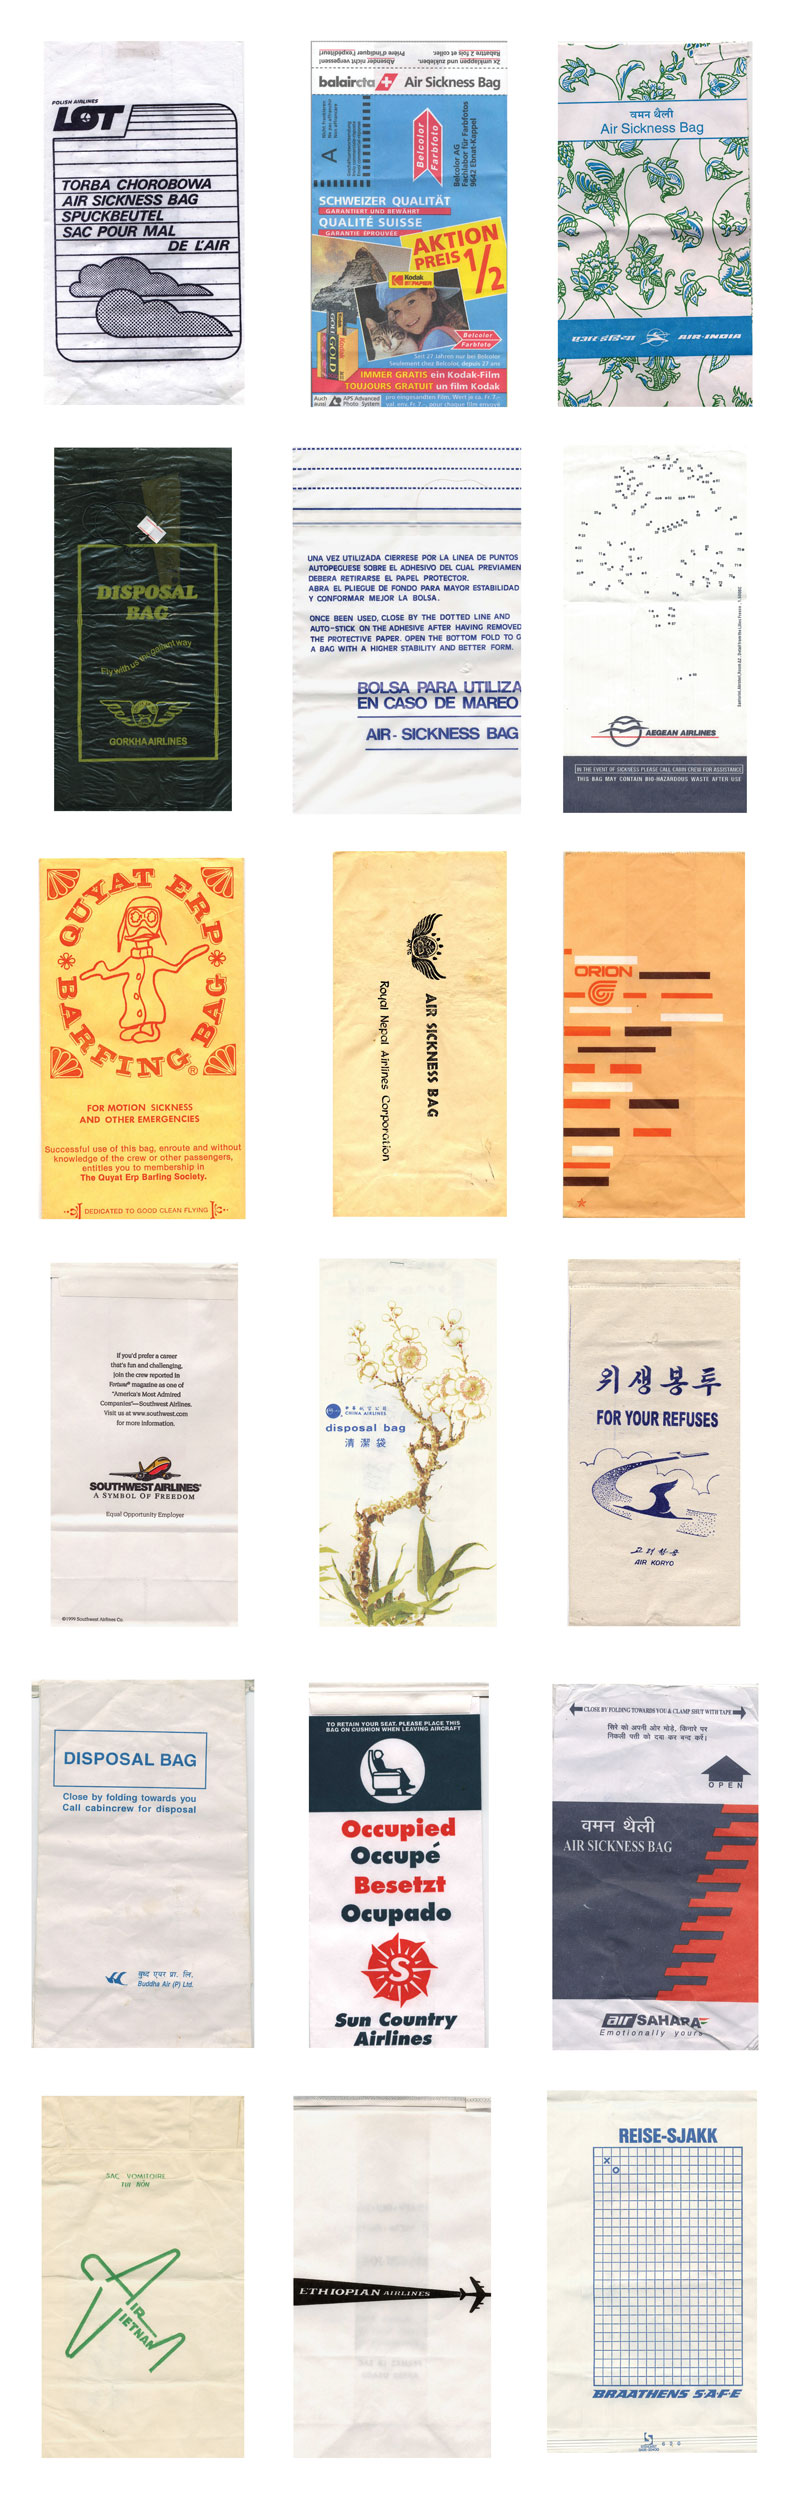 A photograph of a collection of air sickness bags from different international airlines.